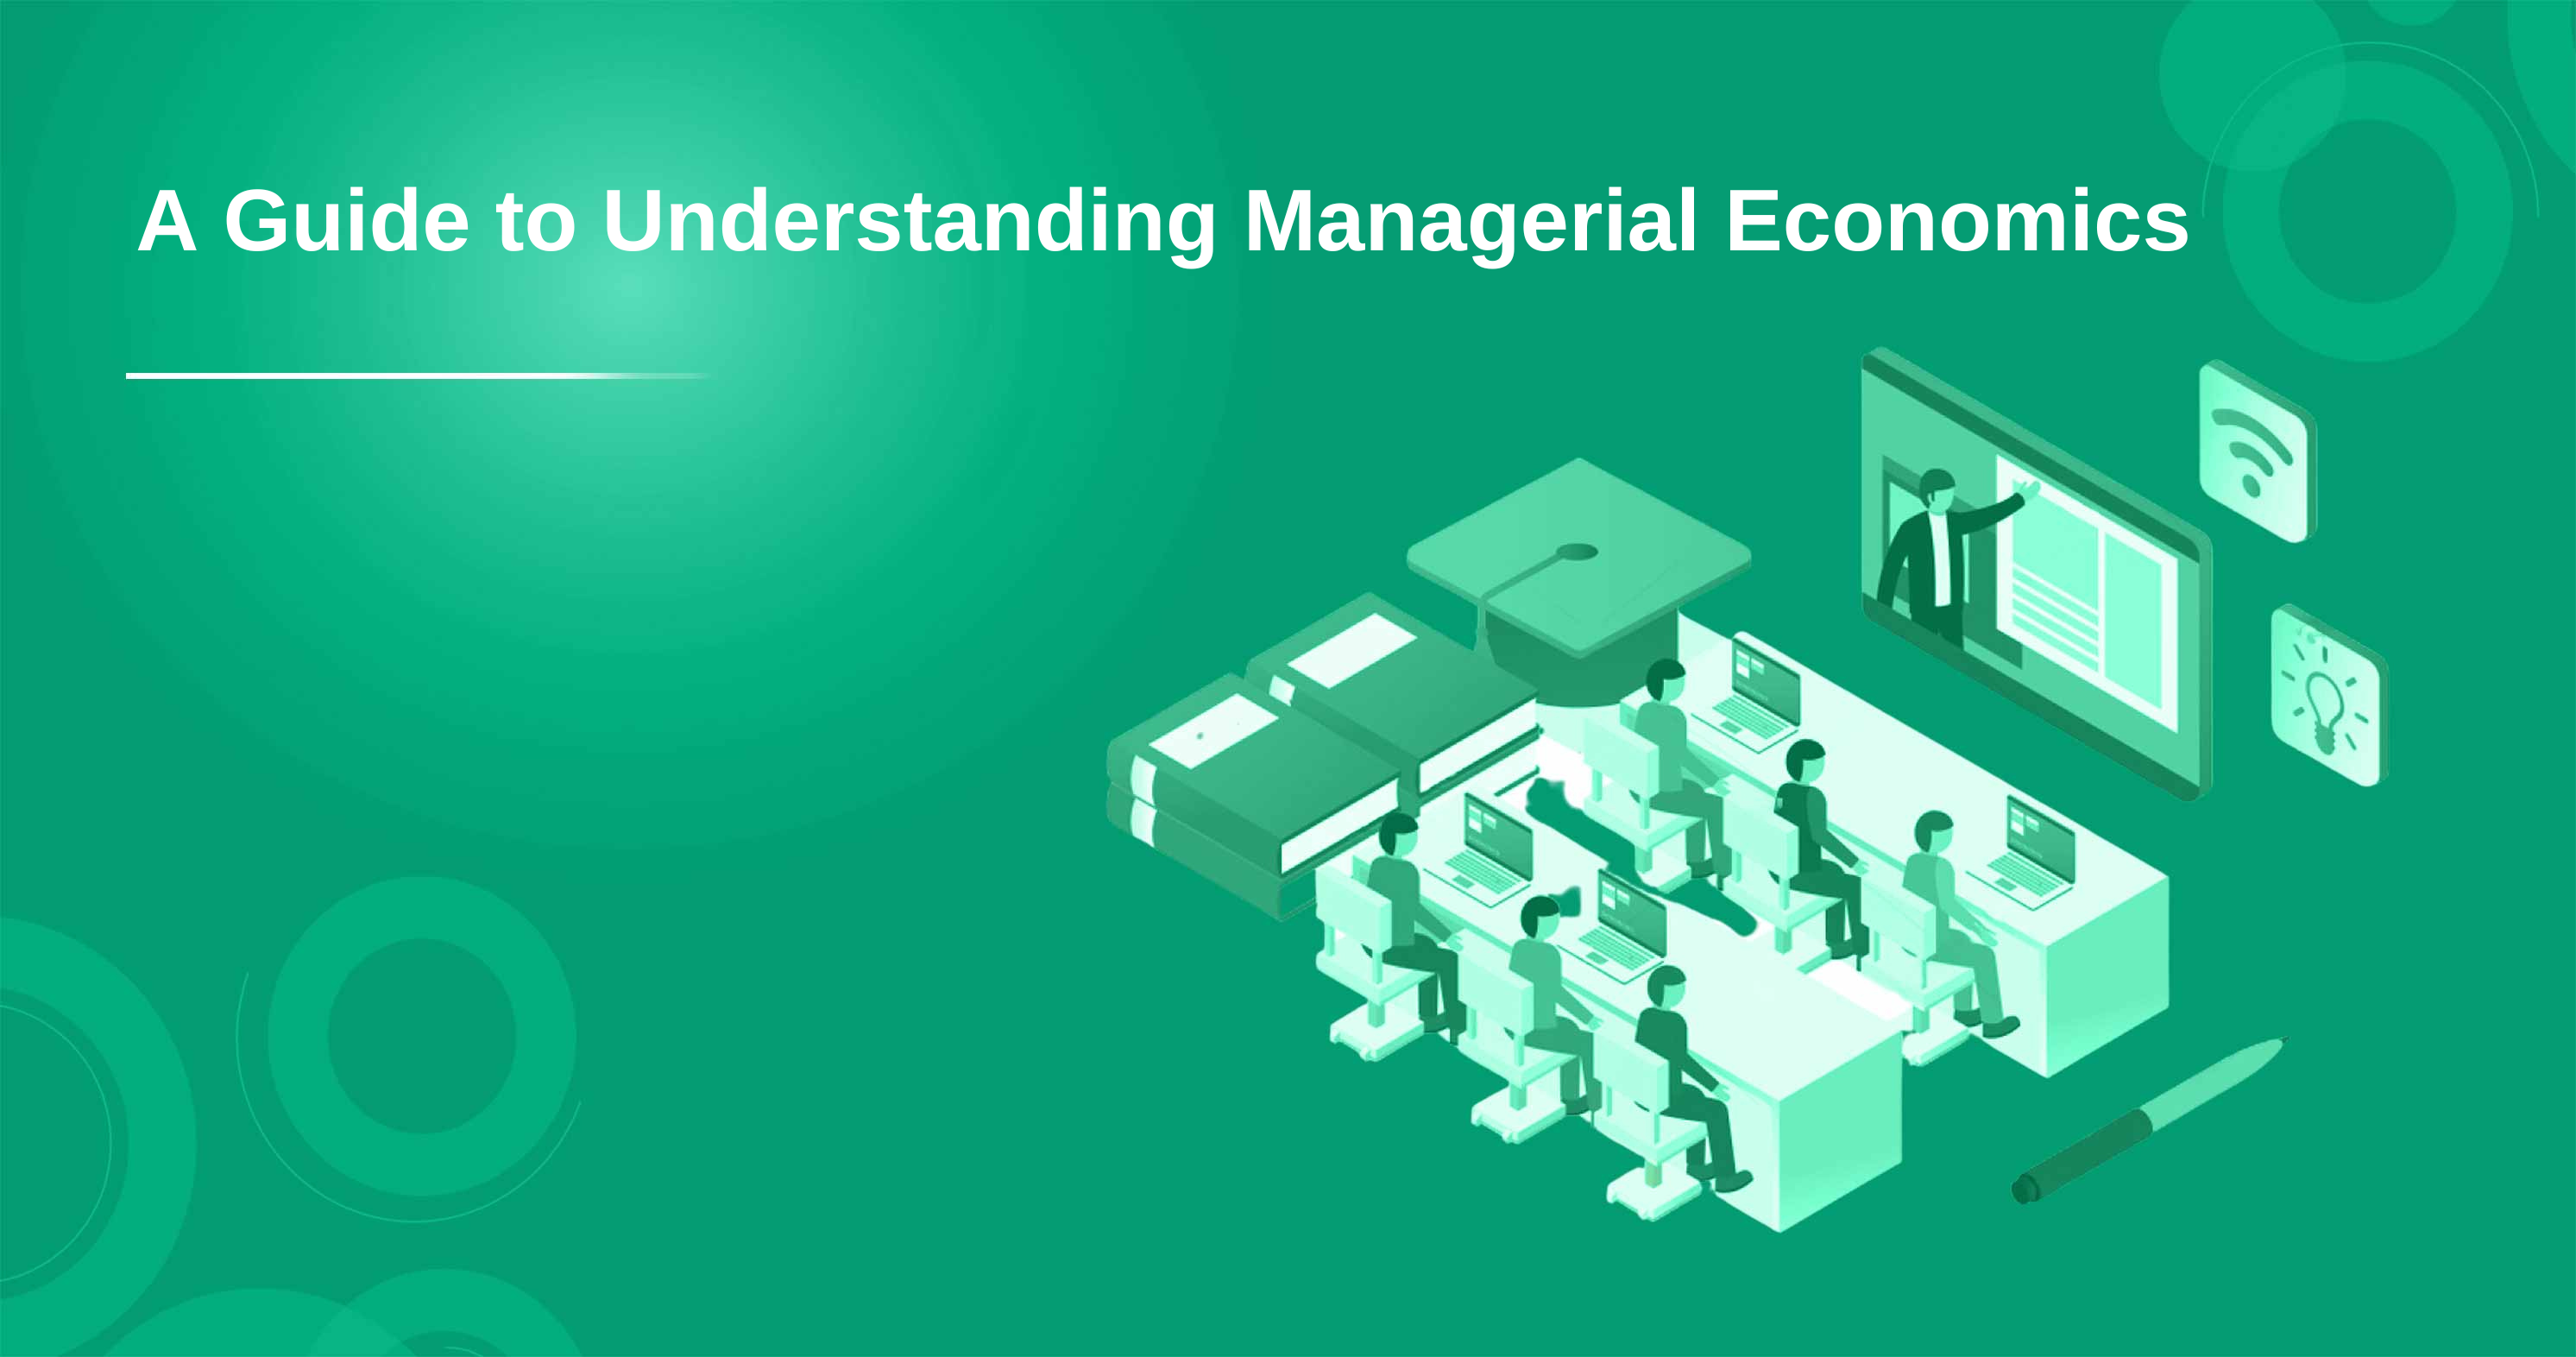 A Guide to Understanding Managerial Economics